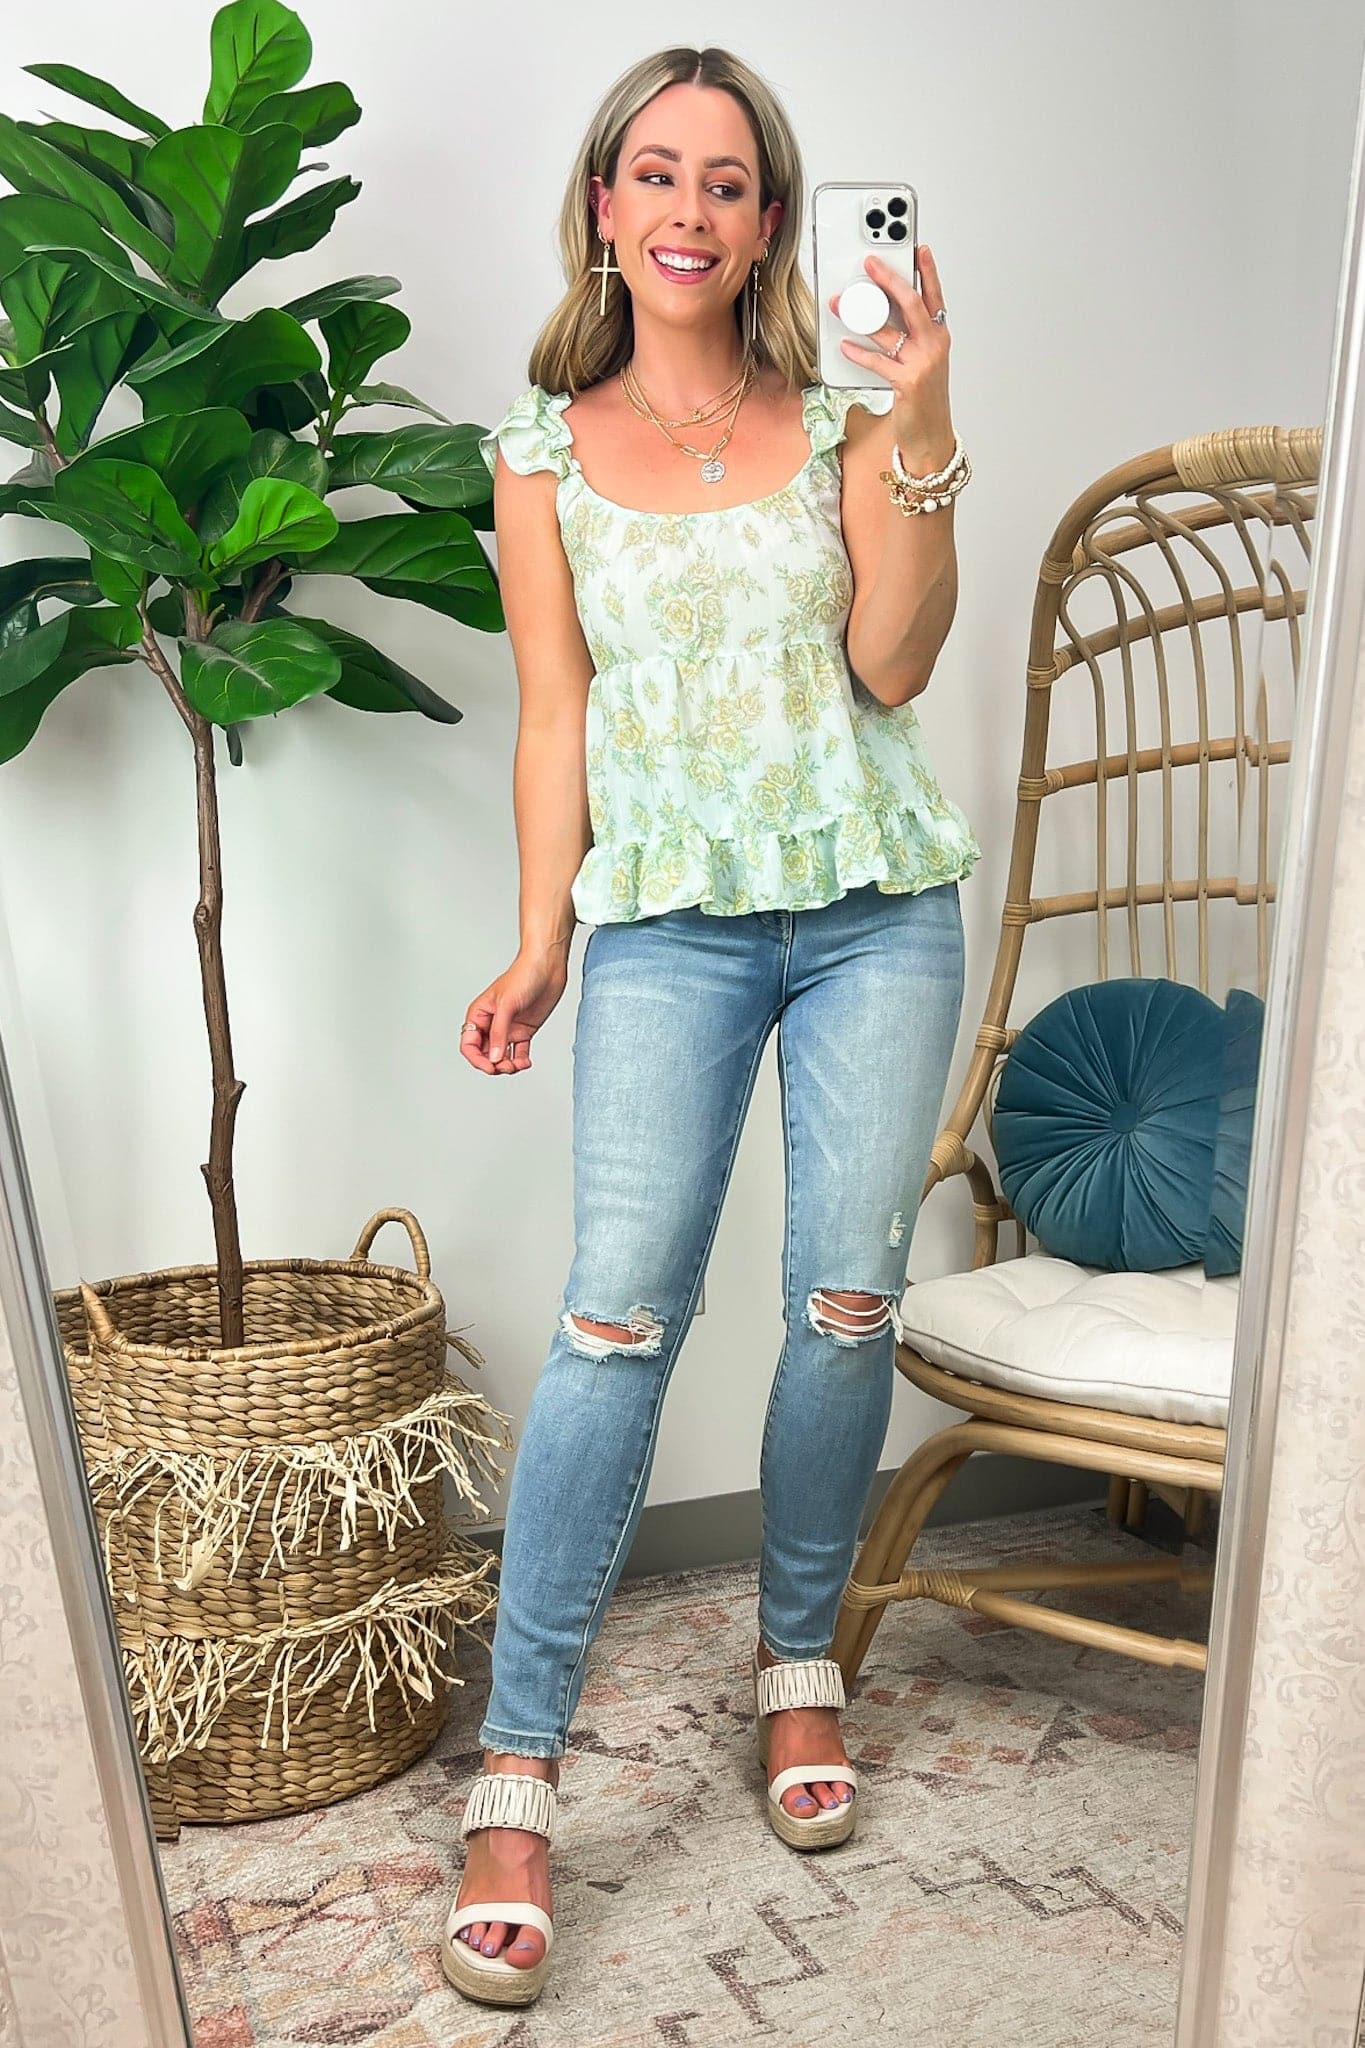  Memorable Outings Floral Tiered Tank Top - FINAL SALE - Madison and Mallory